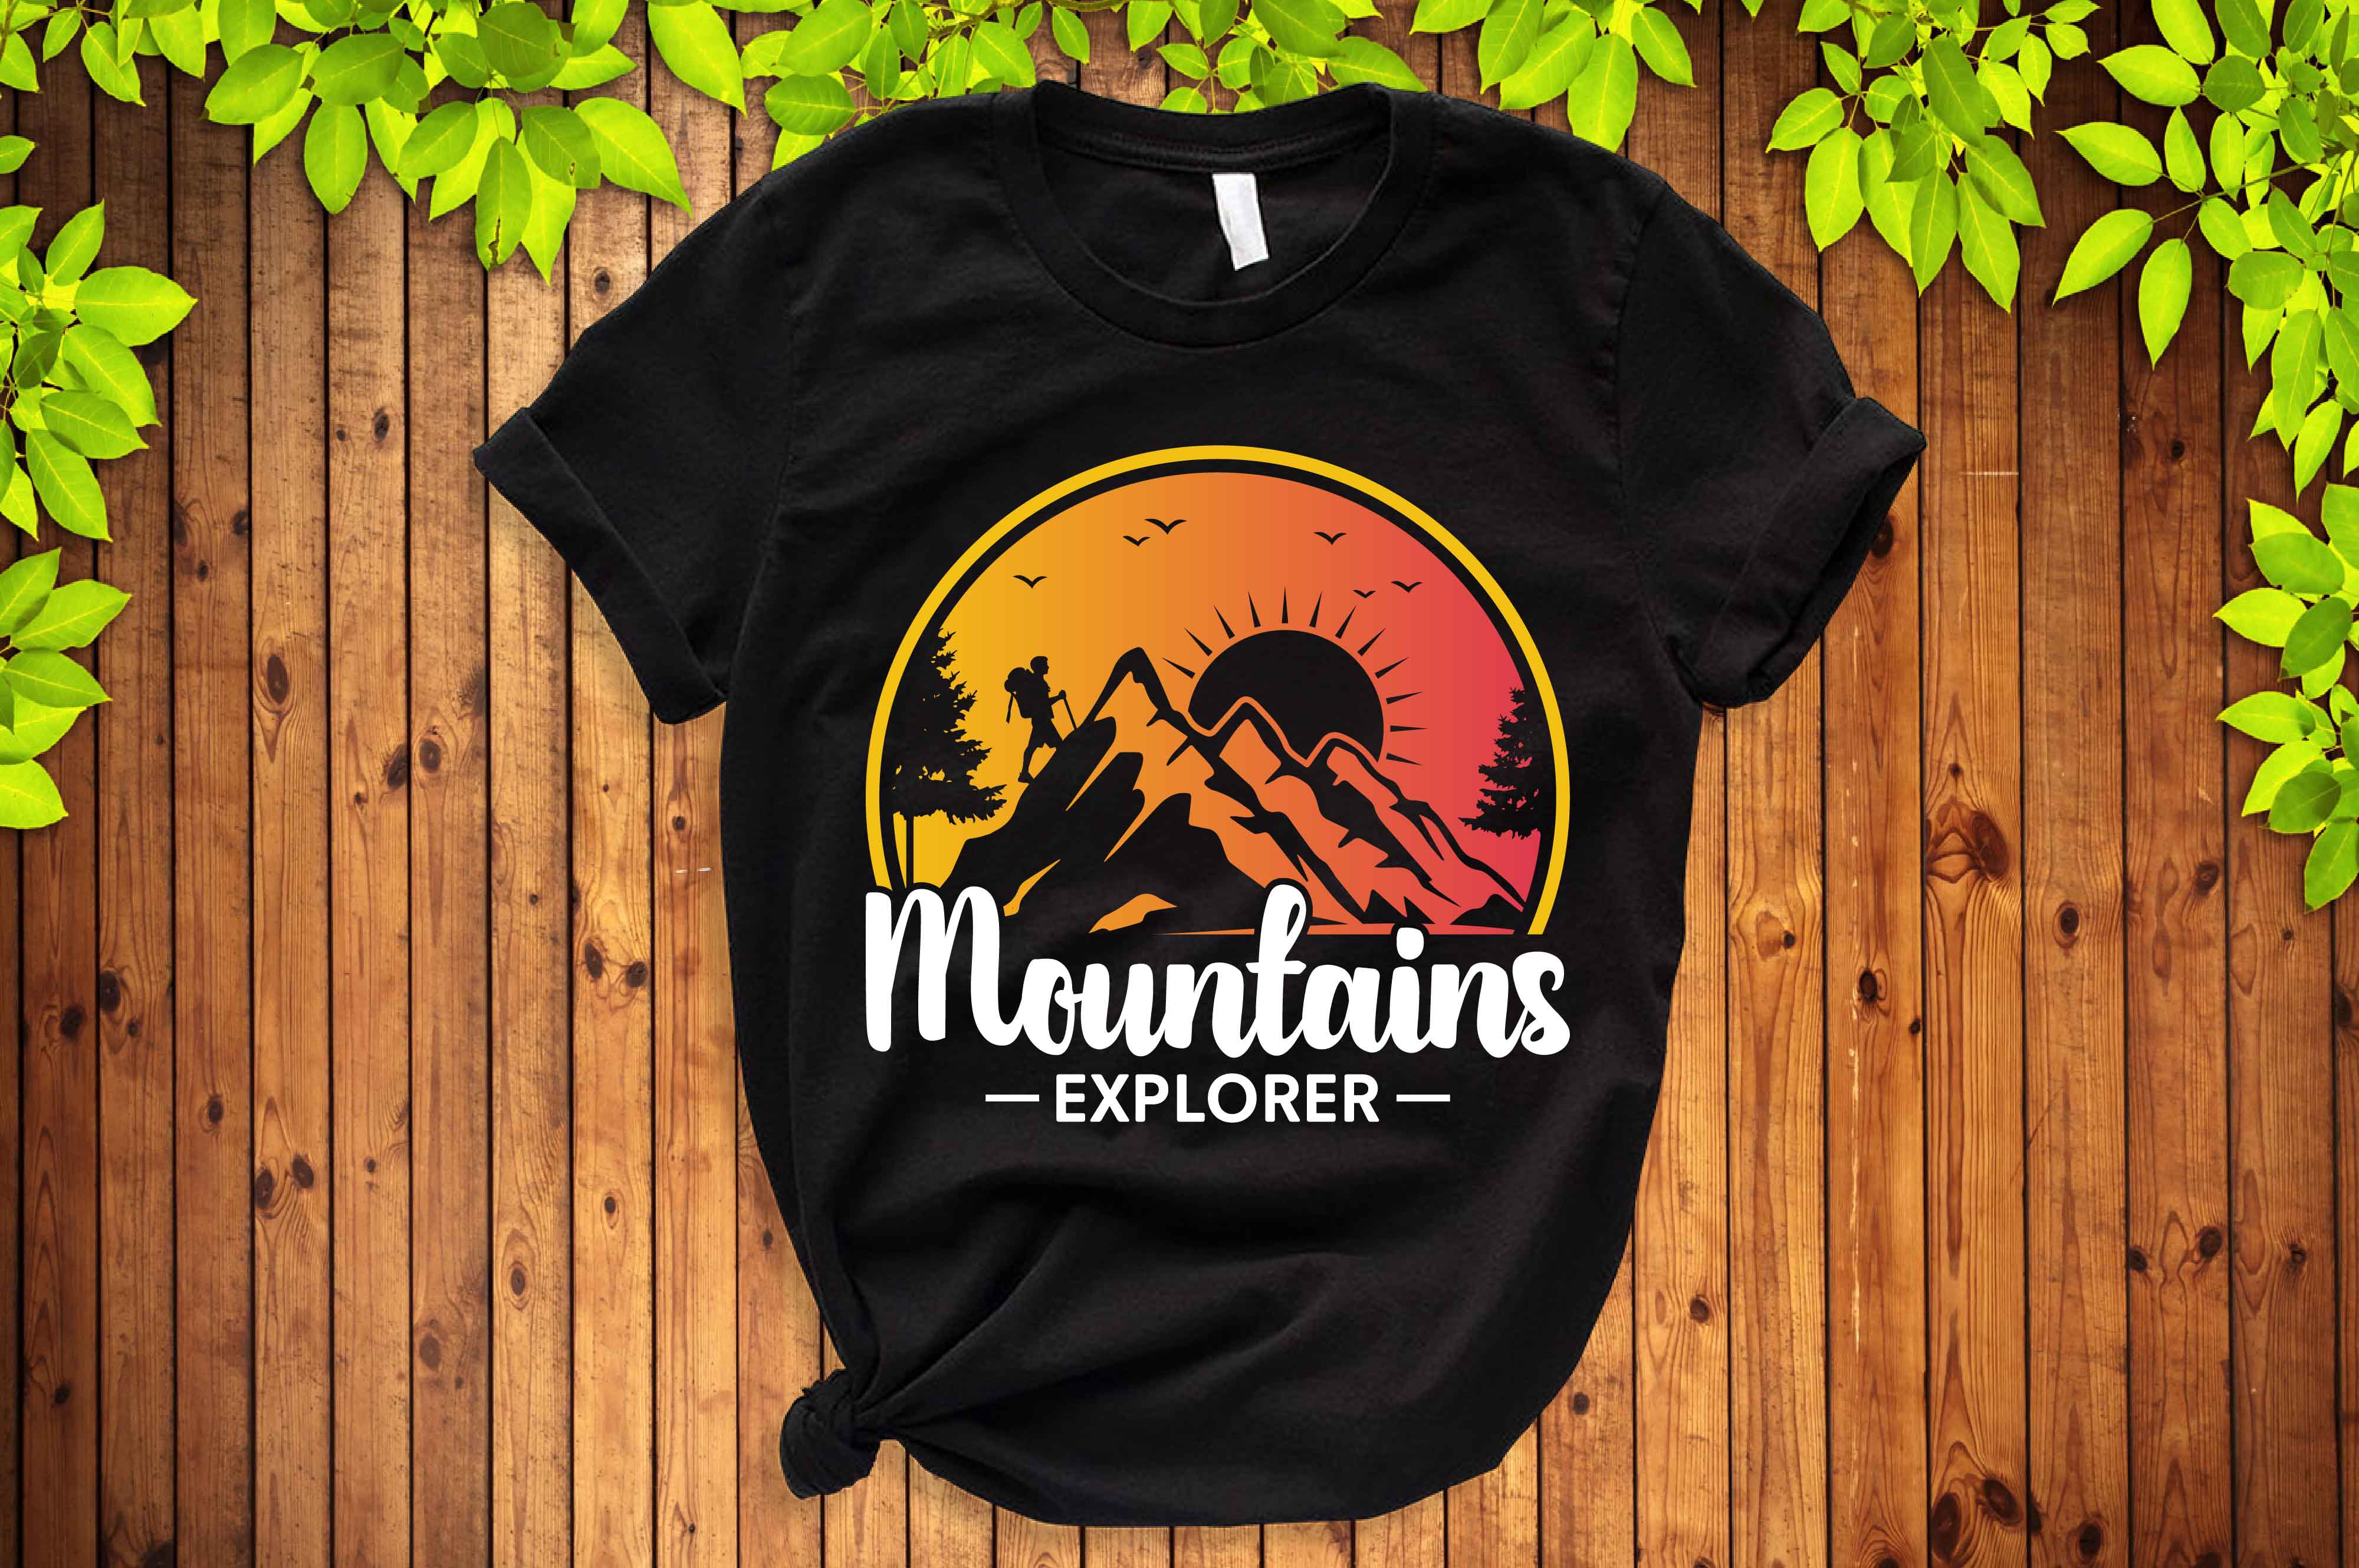 Black t - shirt with the mountains explorer on it.